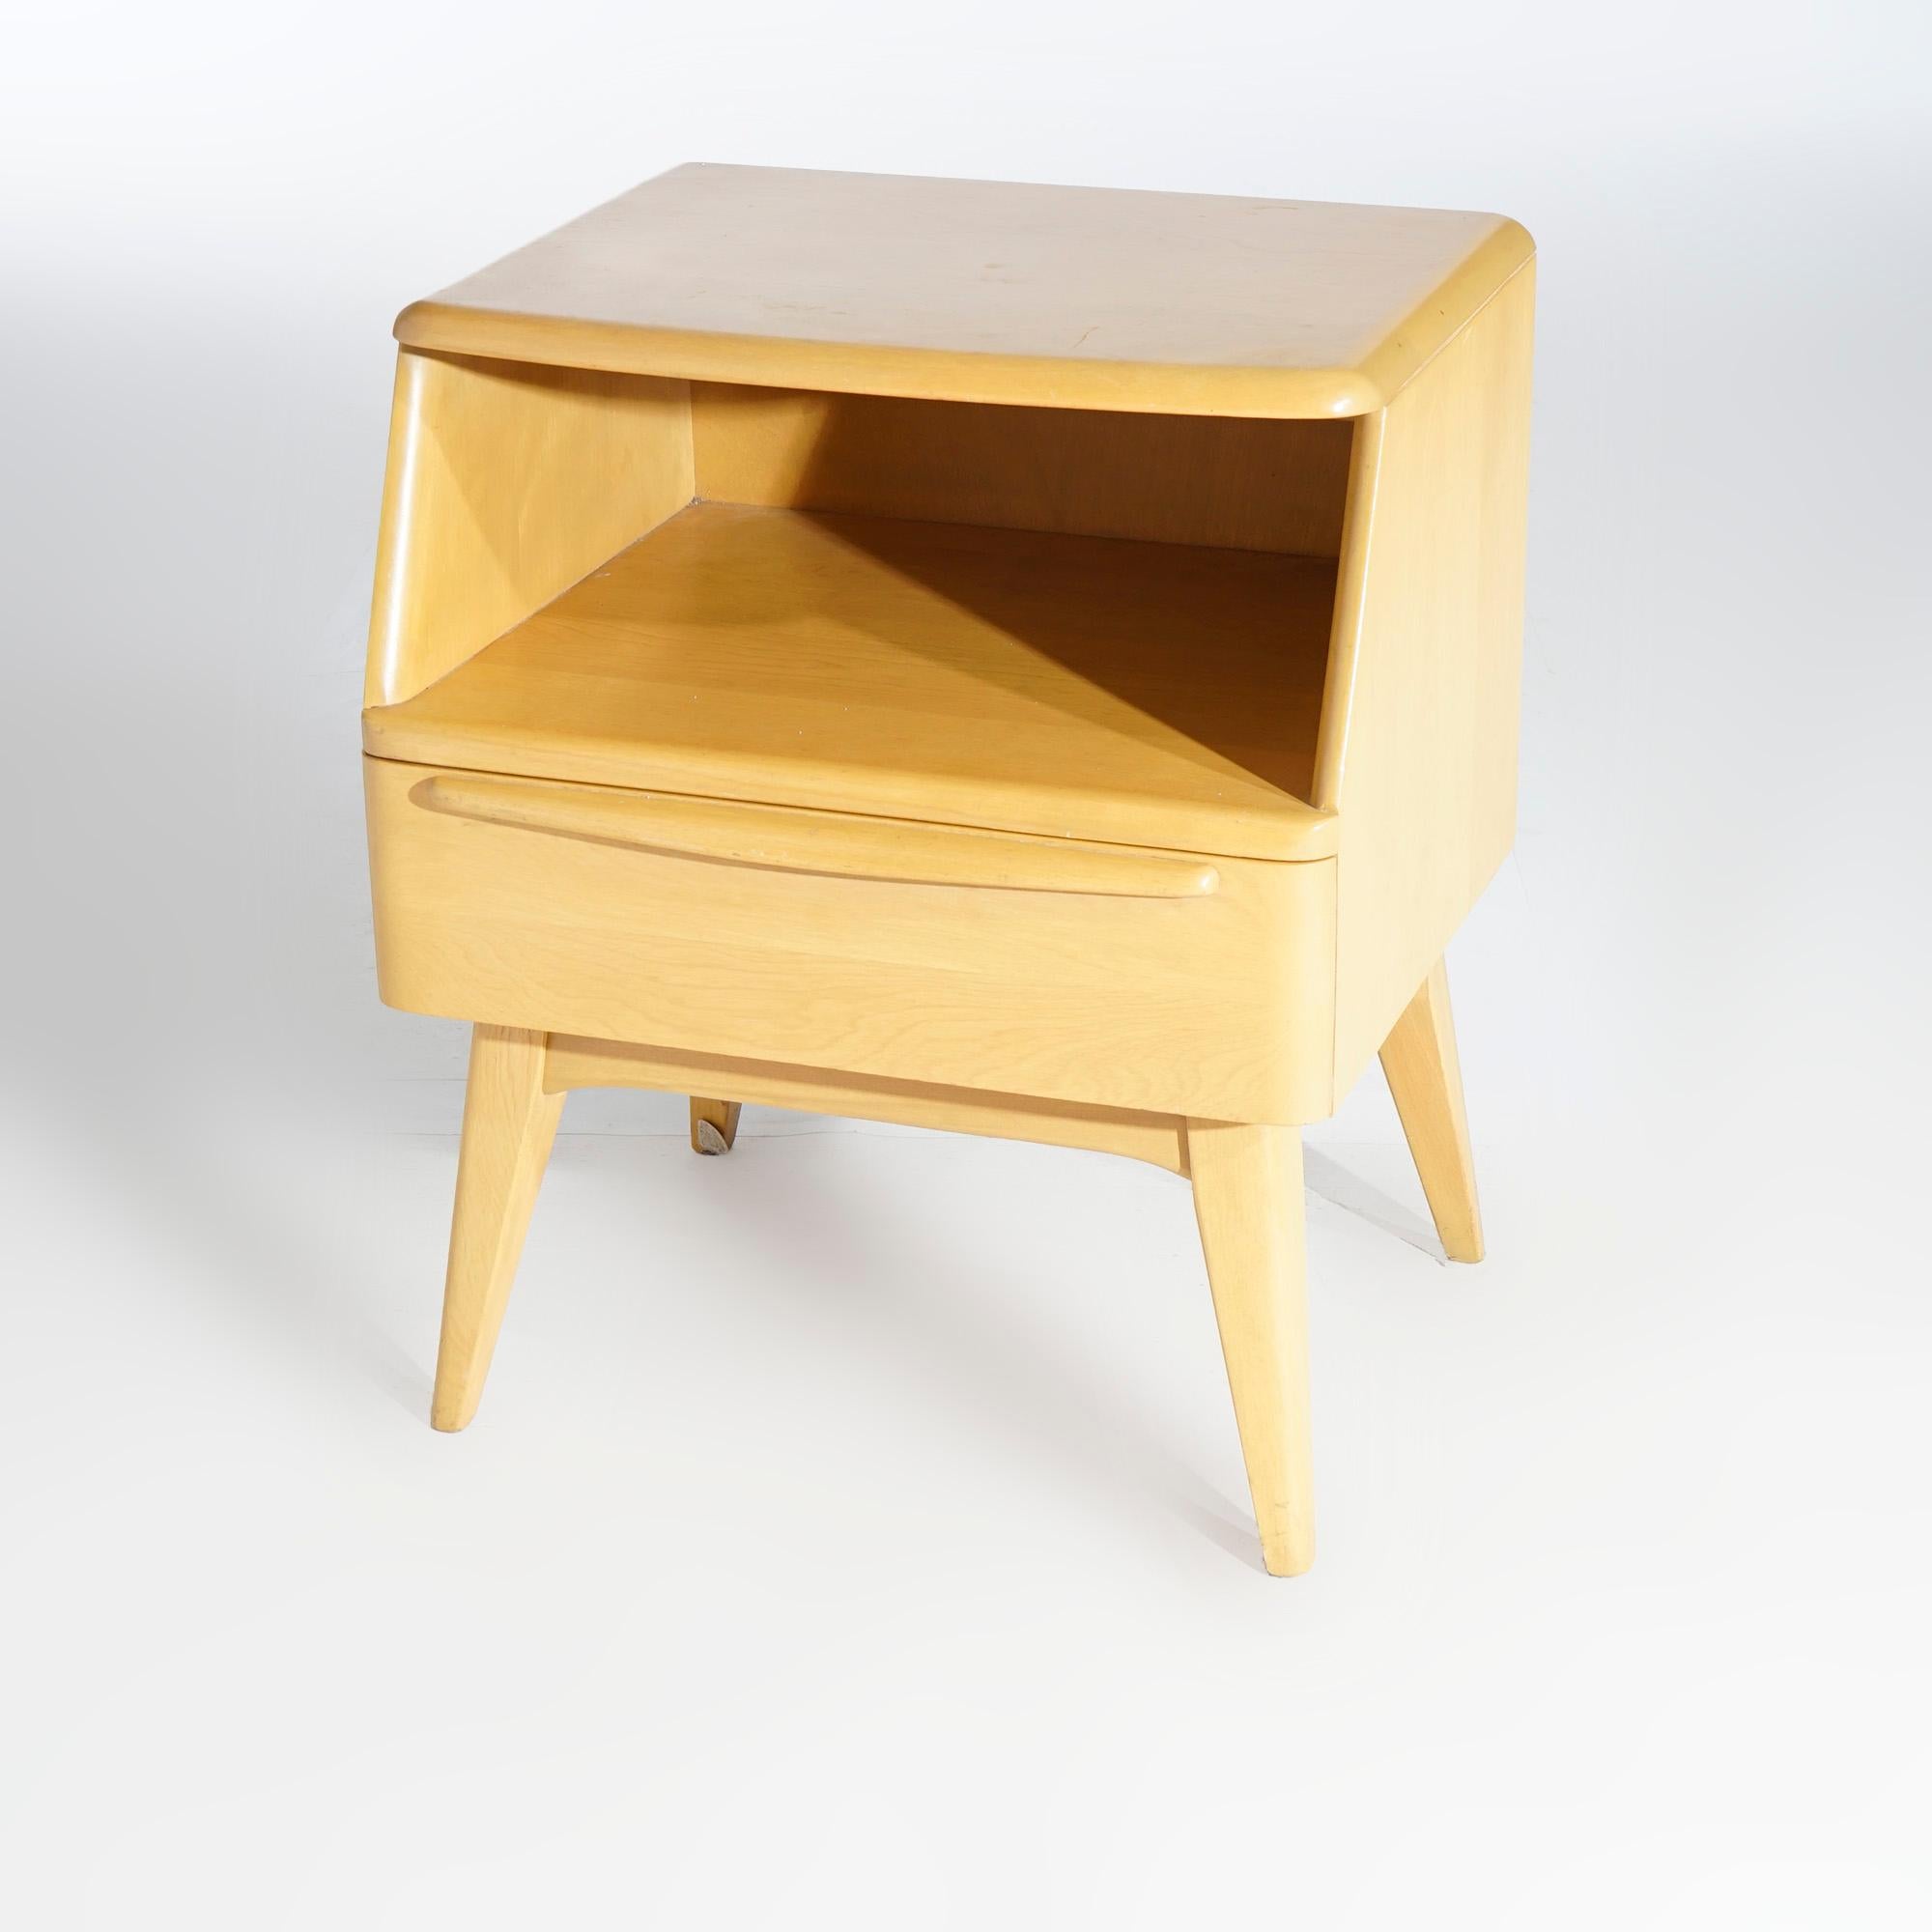 An Mid-Century Modern side stand by Heywood Wakefield offer birch construction with upper open shelf over lower drawer and raised on flared legs, finish in Wheat, maker label as photographed, c1950

Measures- 24.5'' H x 20'' W x 17'' D.